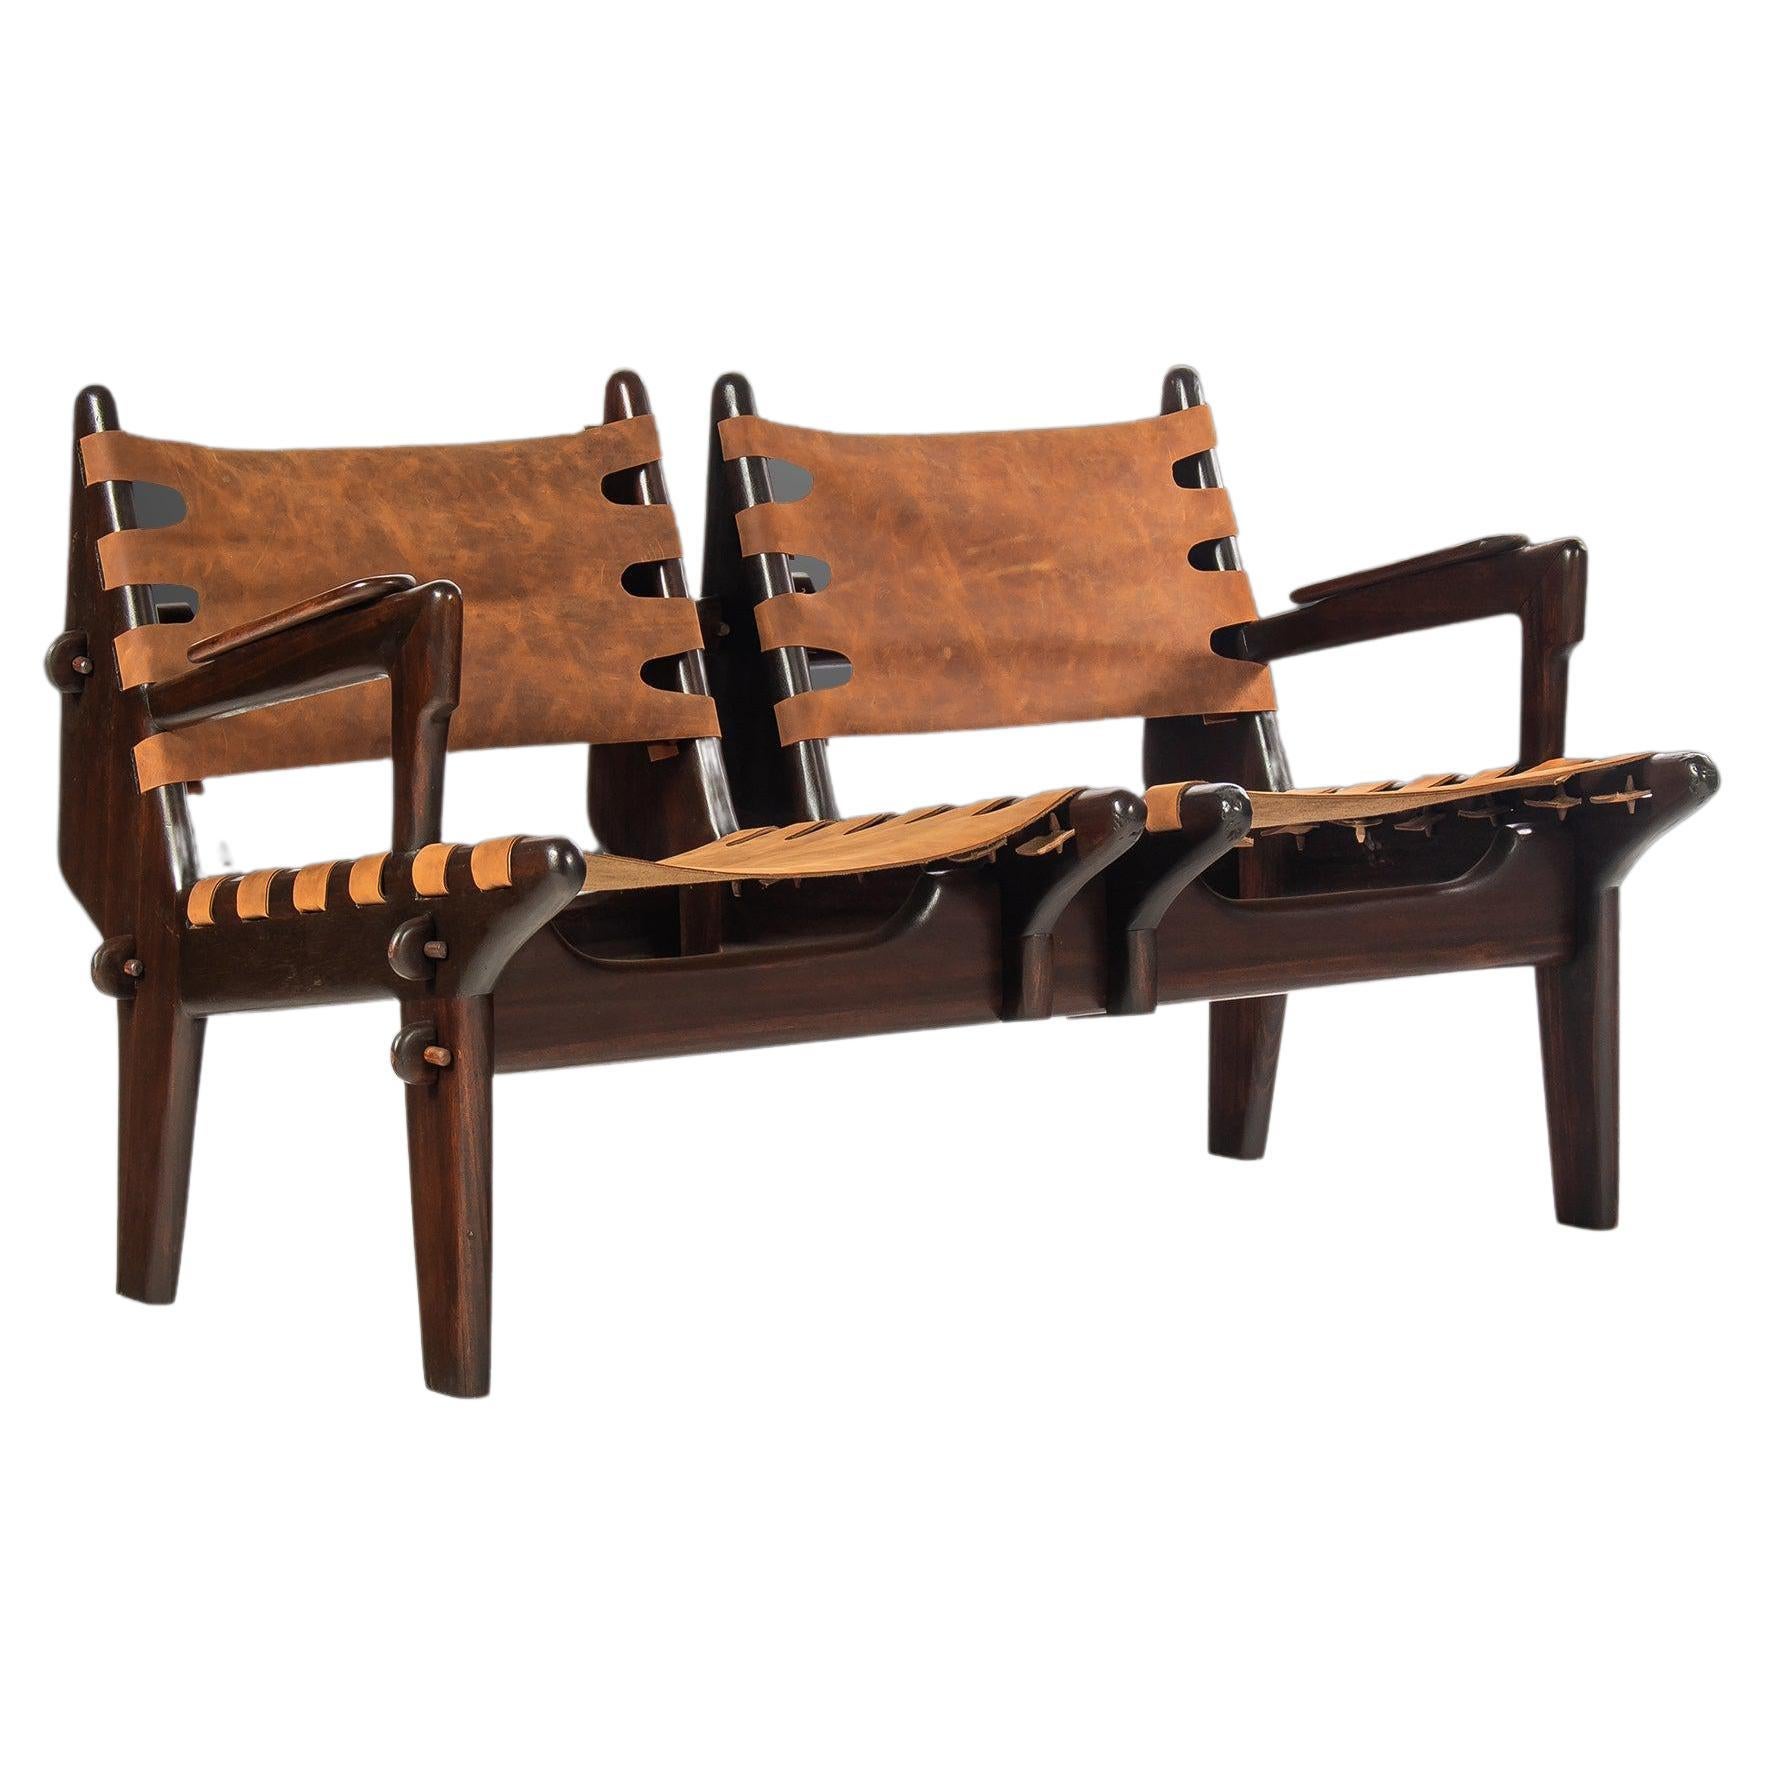 Loveseat in Solid Fruitwood & Leather by Angel Pazmino, Ecuador, c. 1960's For Sale